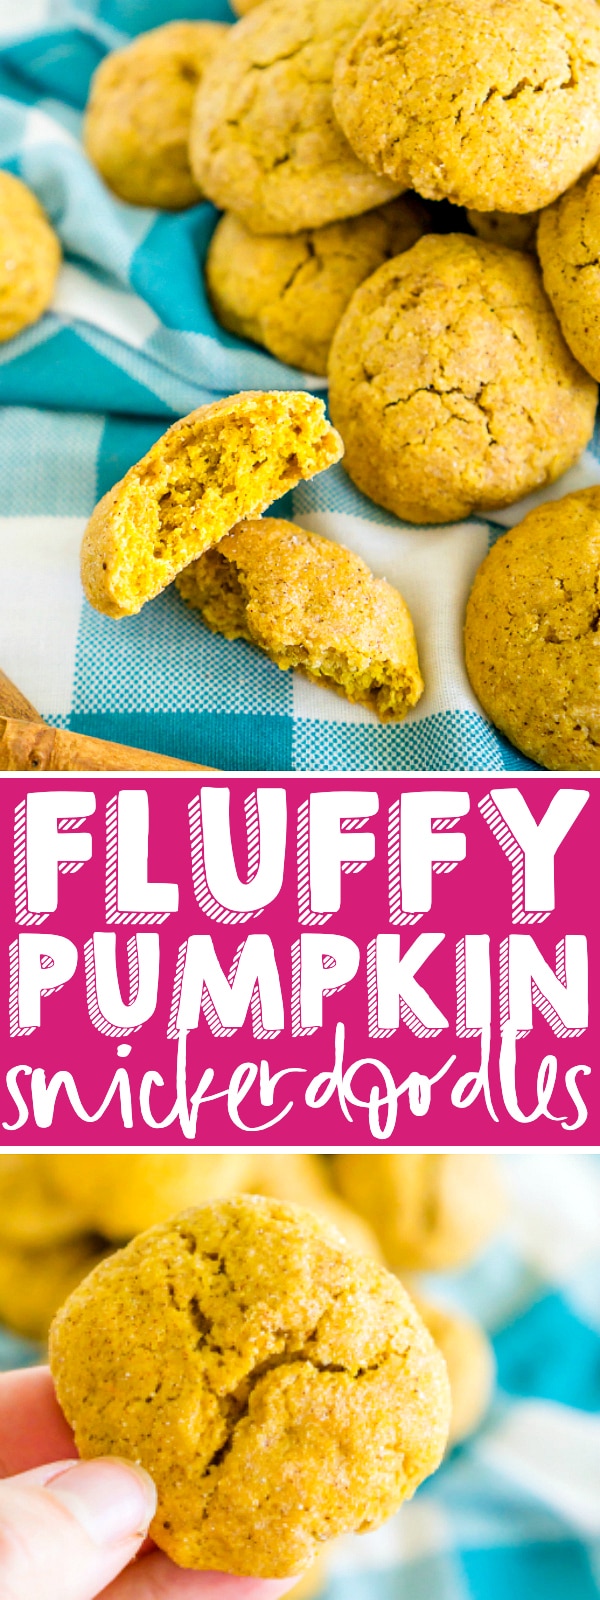 The best cookie recipe for fluffy Pumpkin Snickerdoodles! They are soft, chewy and full of fall spices. You will definitely want to make these for Halloween and Thanksgiving dessert as they'll easily become everyone's favorite fall cookie! | THE LOVE NERDS #cookierecipe #pumpkingcookie #snickerdoodlerecipes